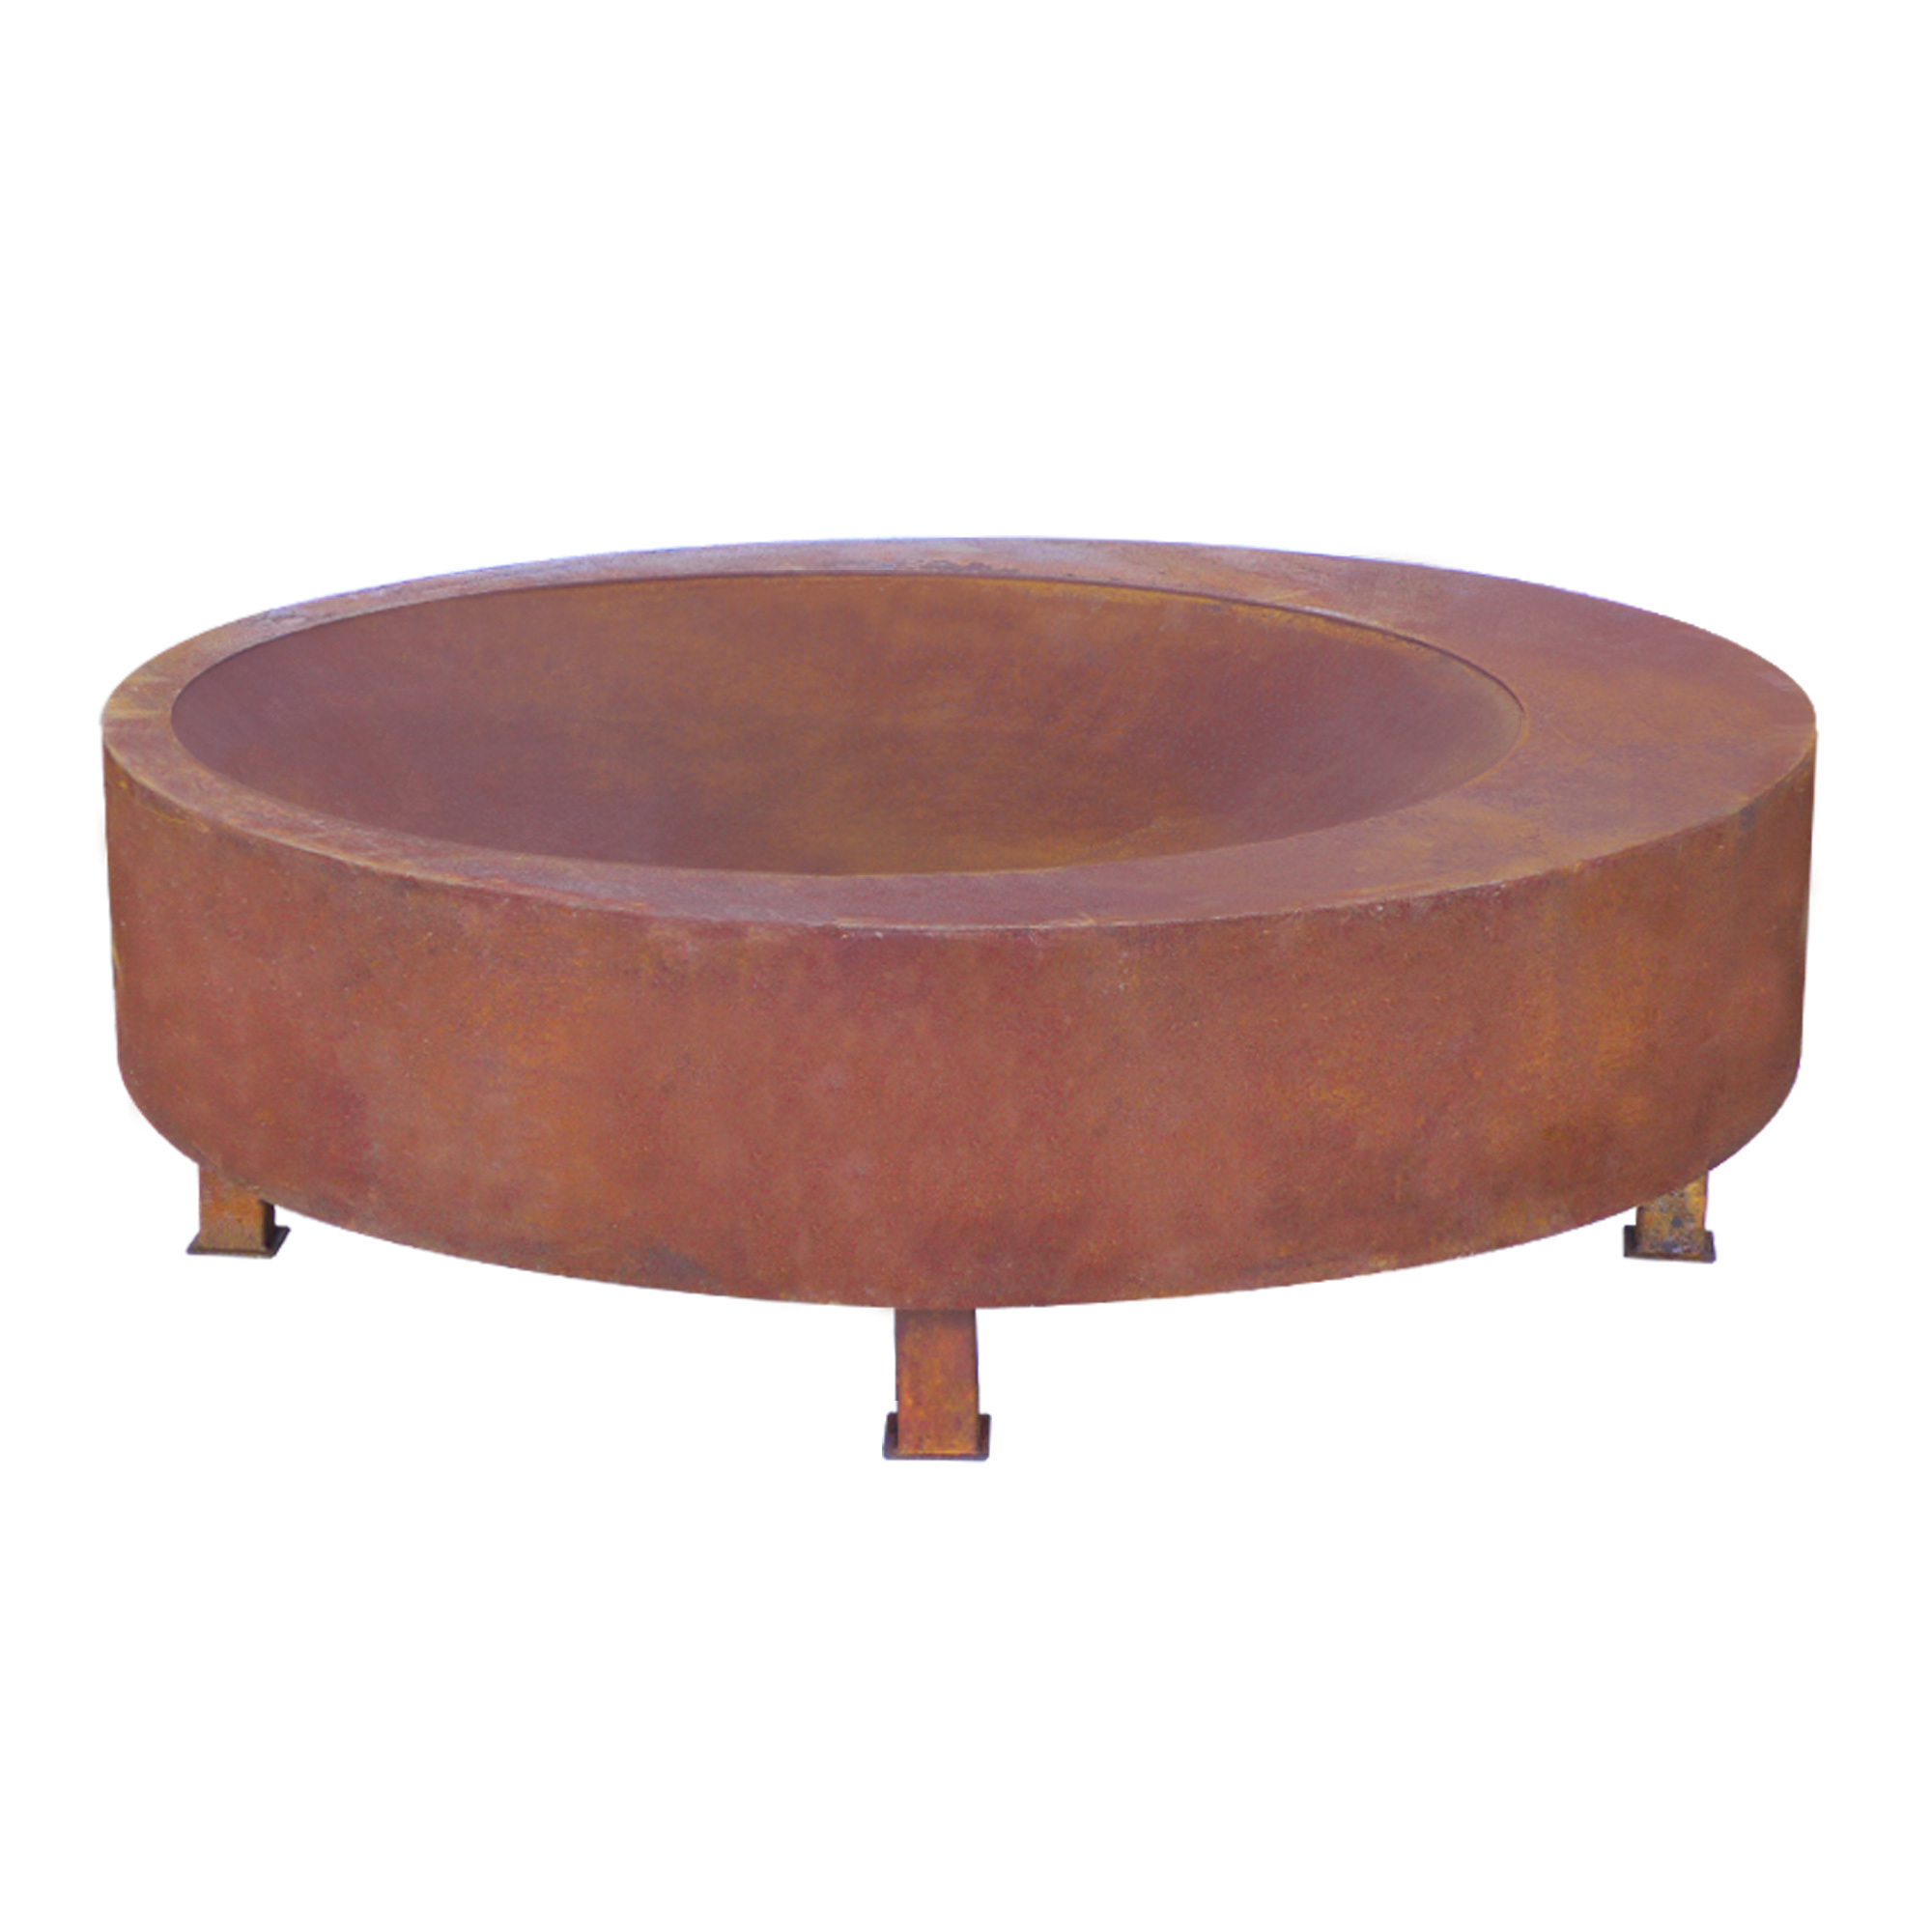 Montana 100 Rust Fire Pit Temple, Fire Pits Under $100